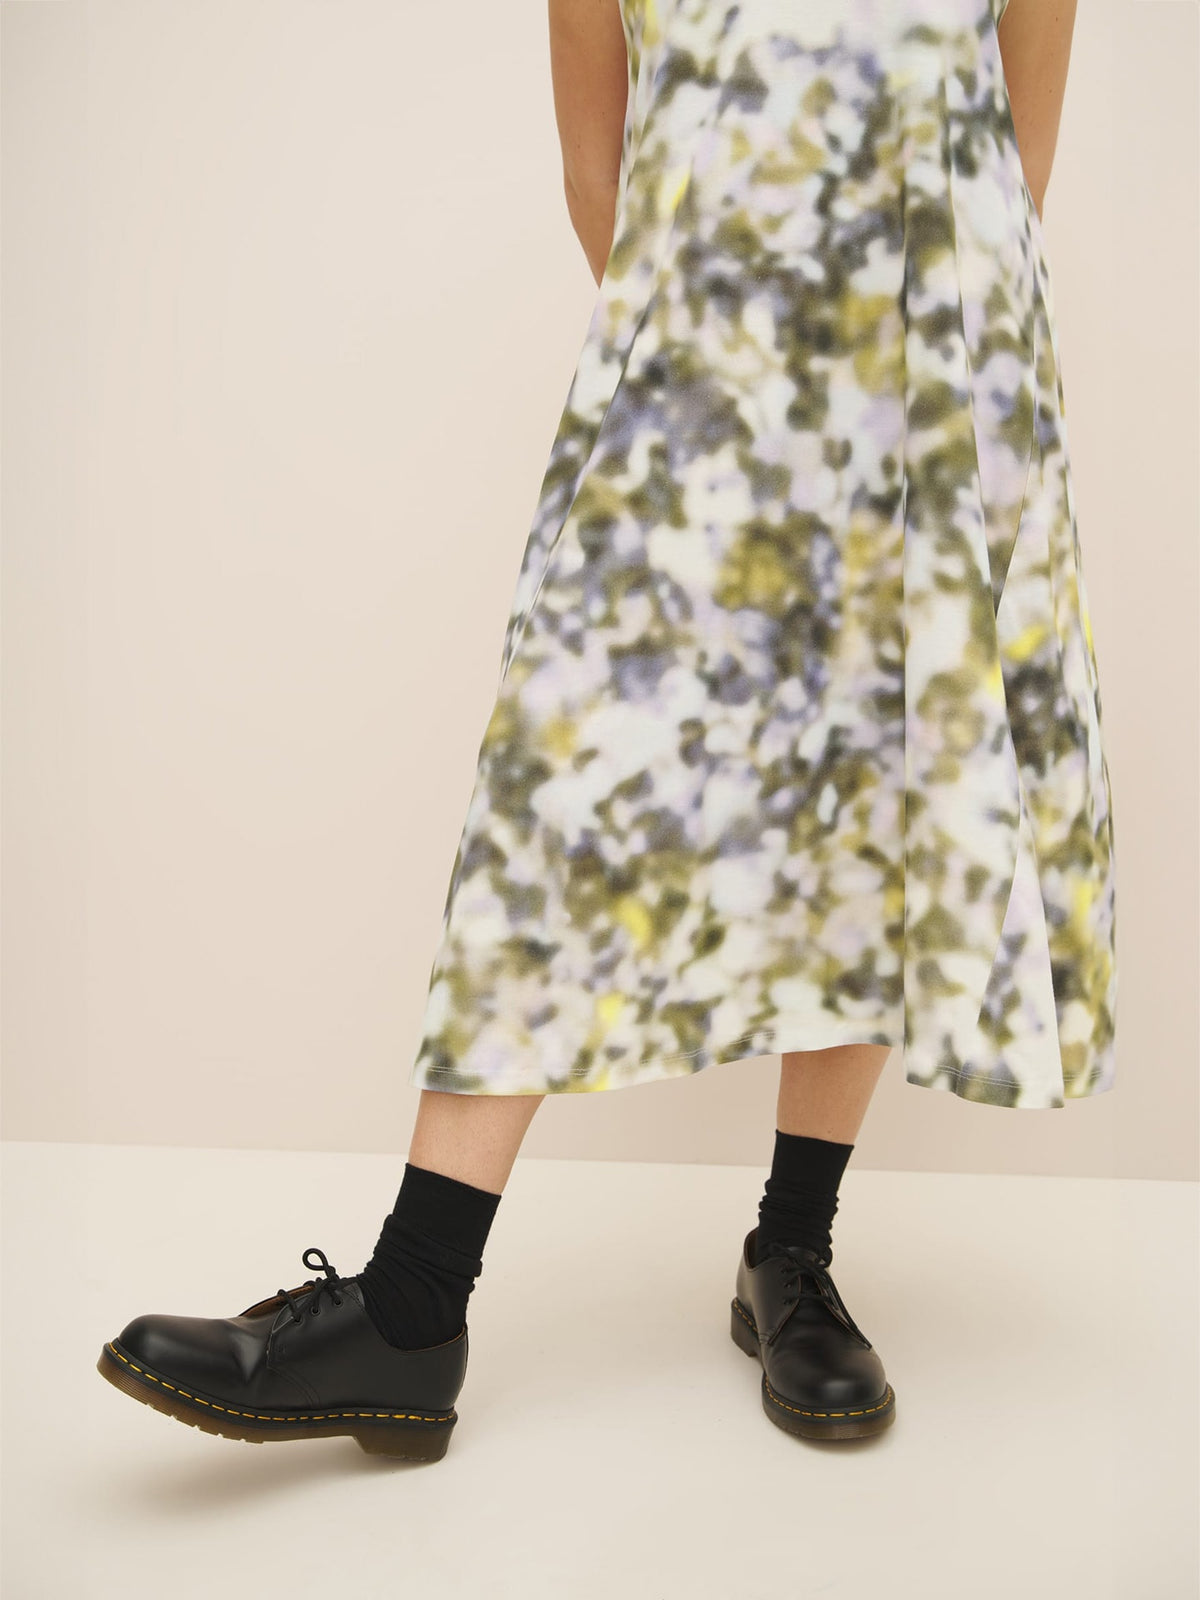 A woman wearing a Komorebi Dress by Kowtow made of organic cotton and black shoes.